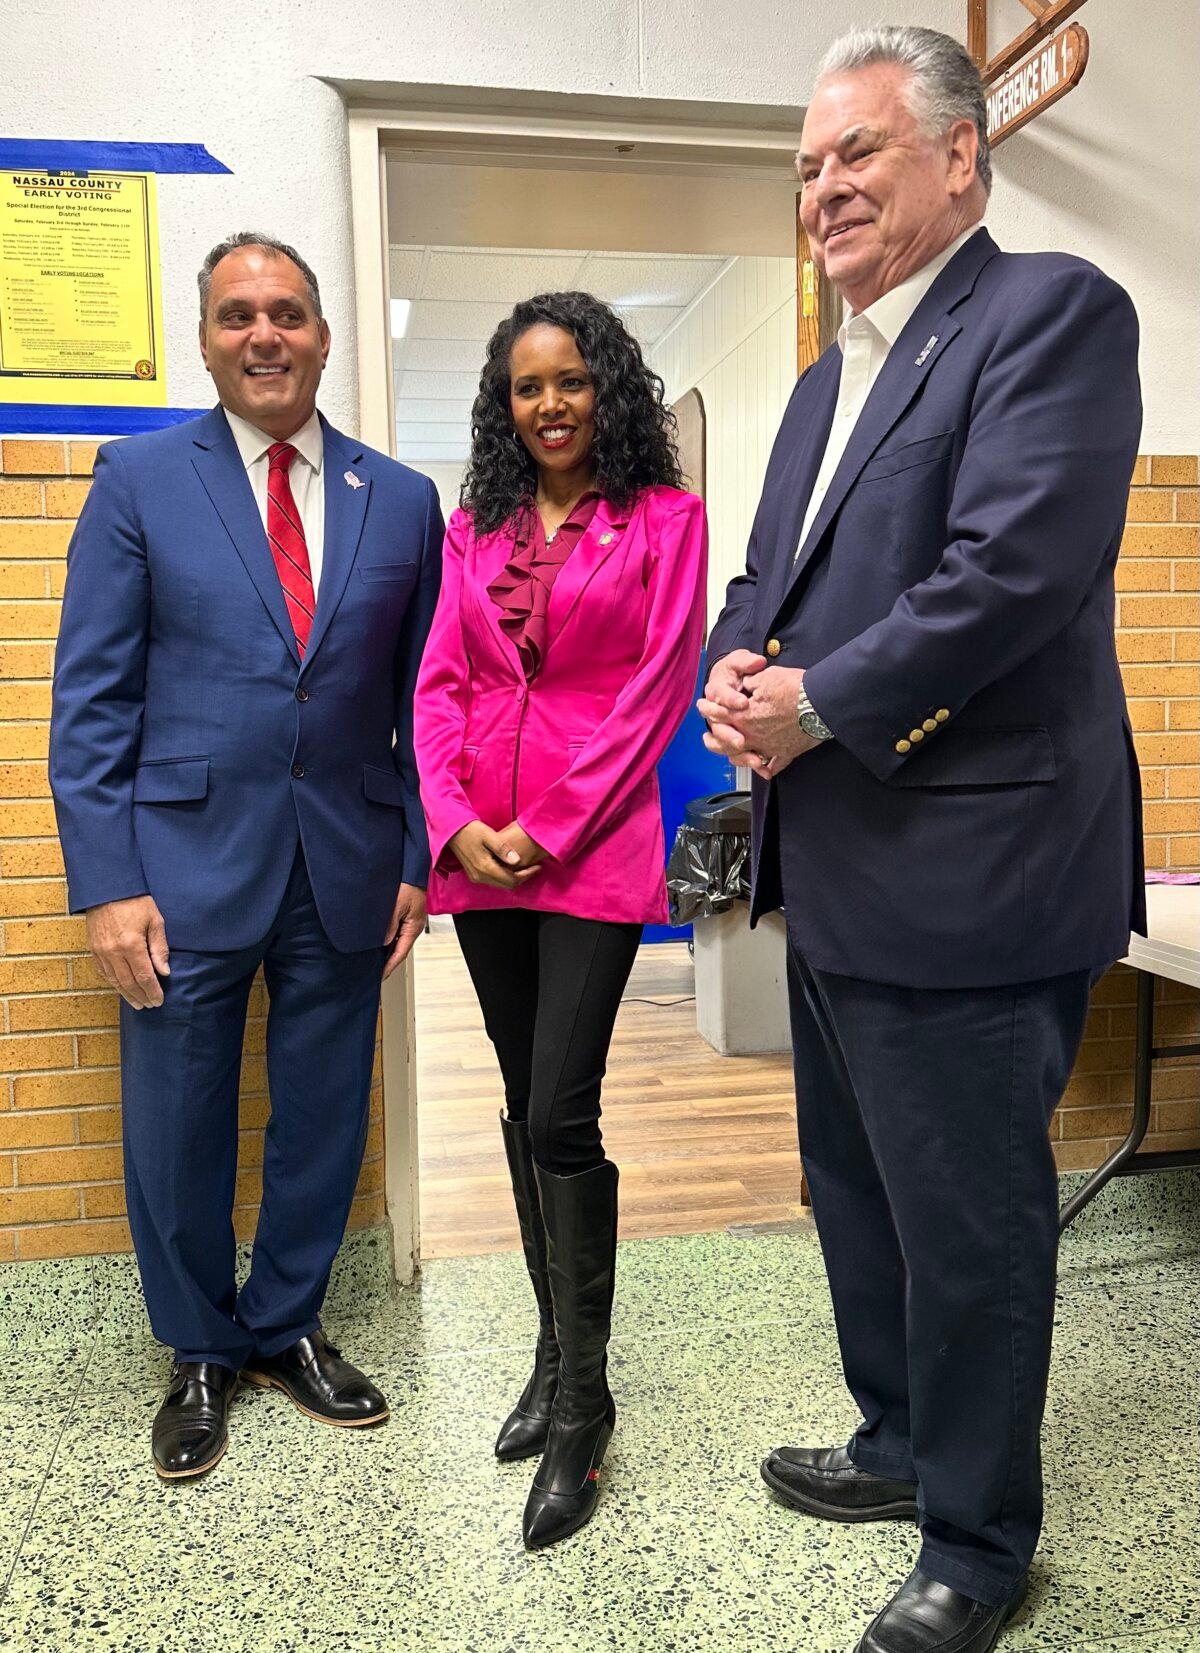 Oyster Bay Town Supervisor Joseph Saladino, Mazi Pilip, and former Congressman Peter King at the Robert E. Picken Town Hall South building on Feb. 9, 2024. (Juliette Fairley/The Epoch Times)